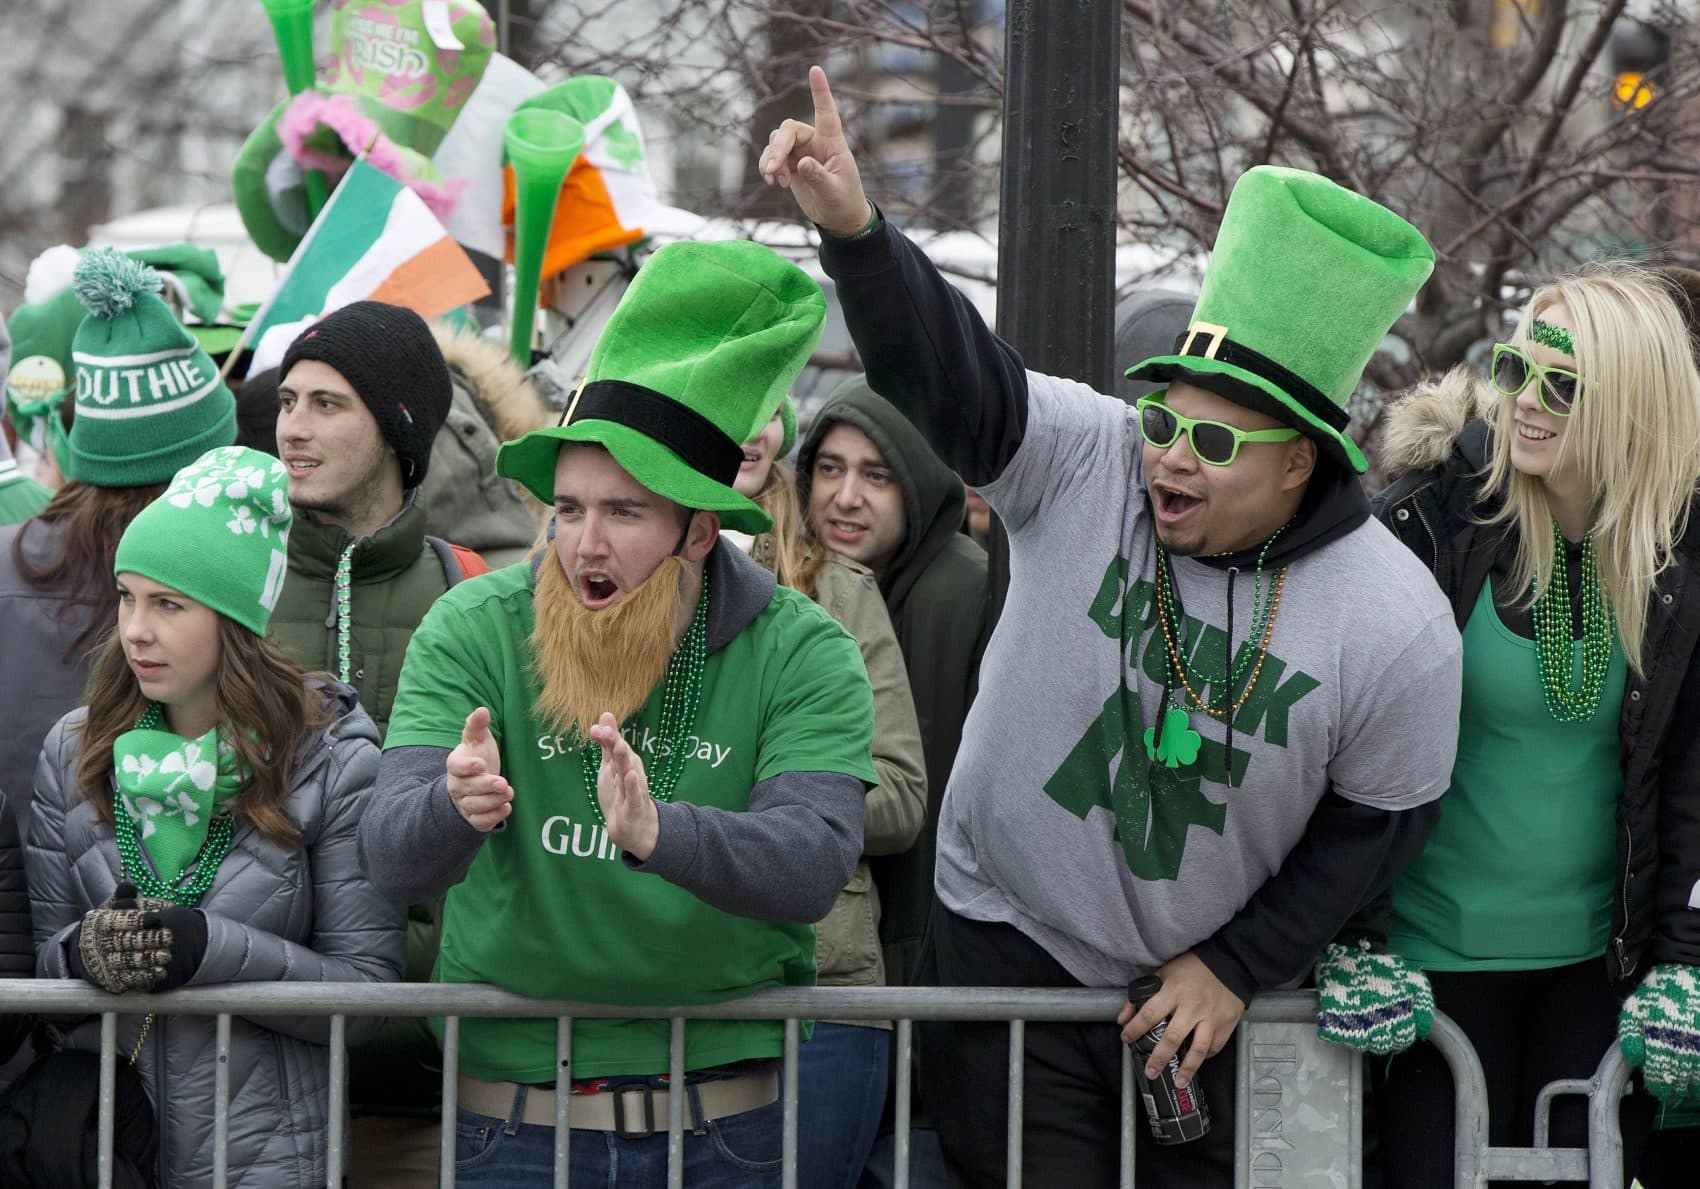 Spectators cheer during the annual St. Patrick's Day parade in Boston in 2017. (Michael Dwyer/AP)